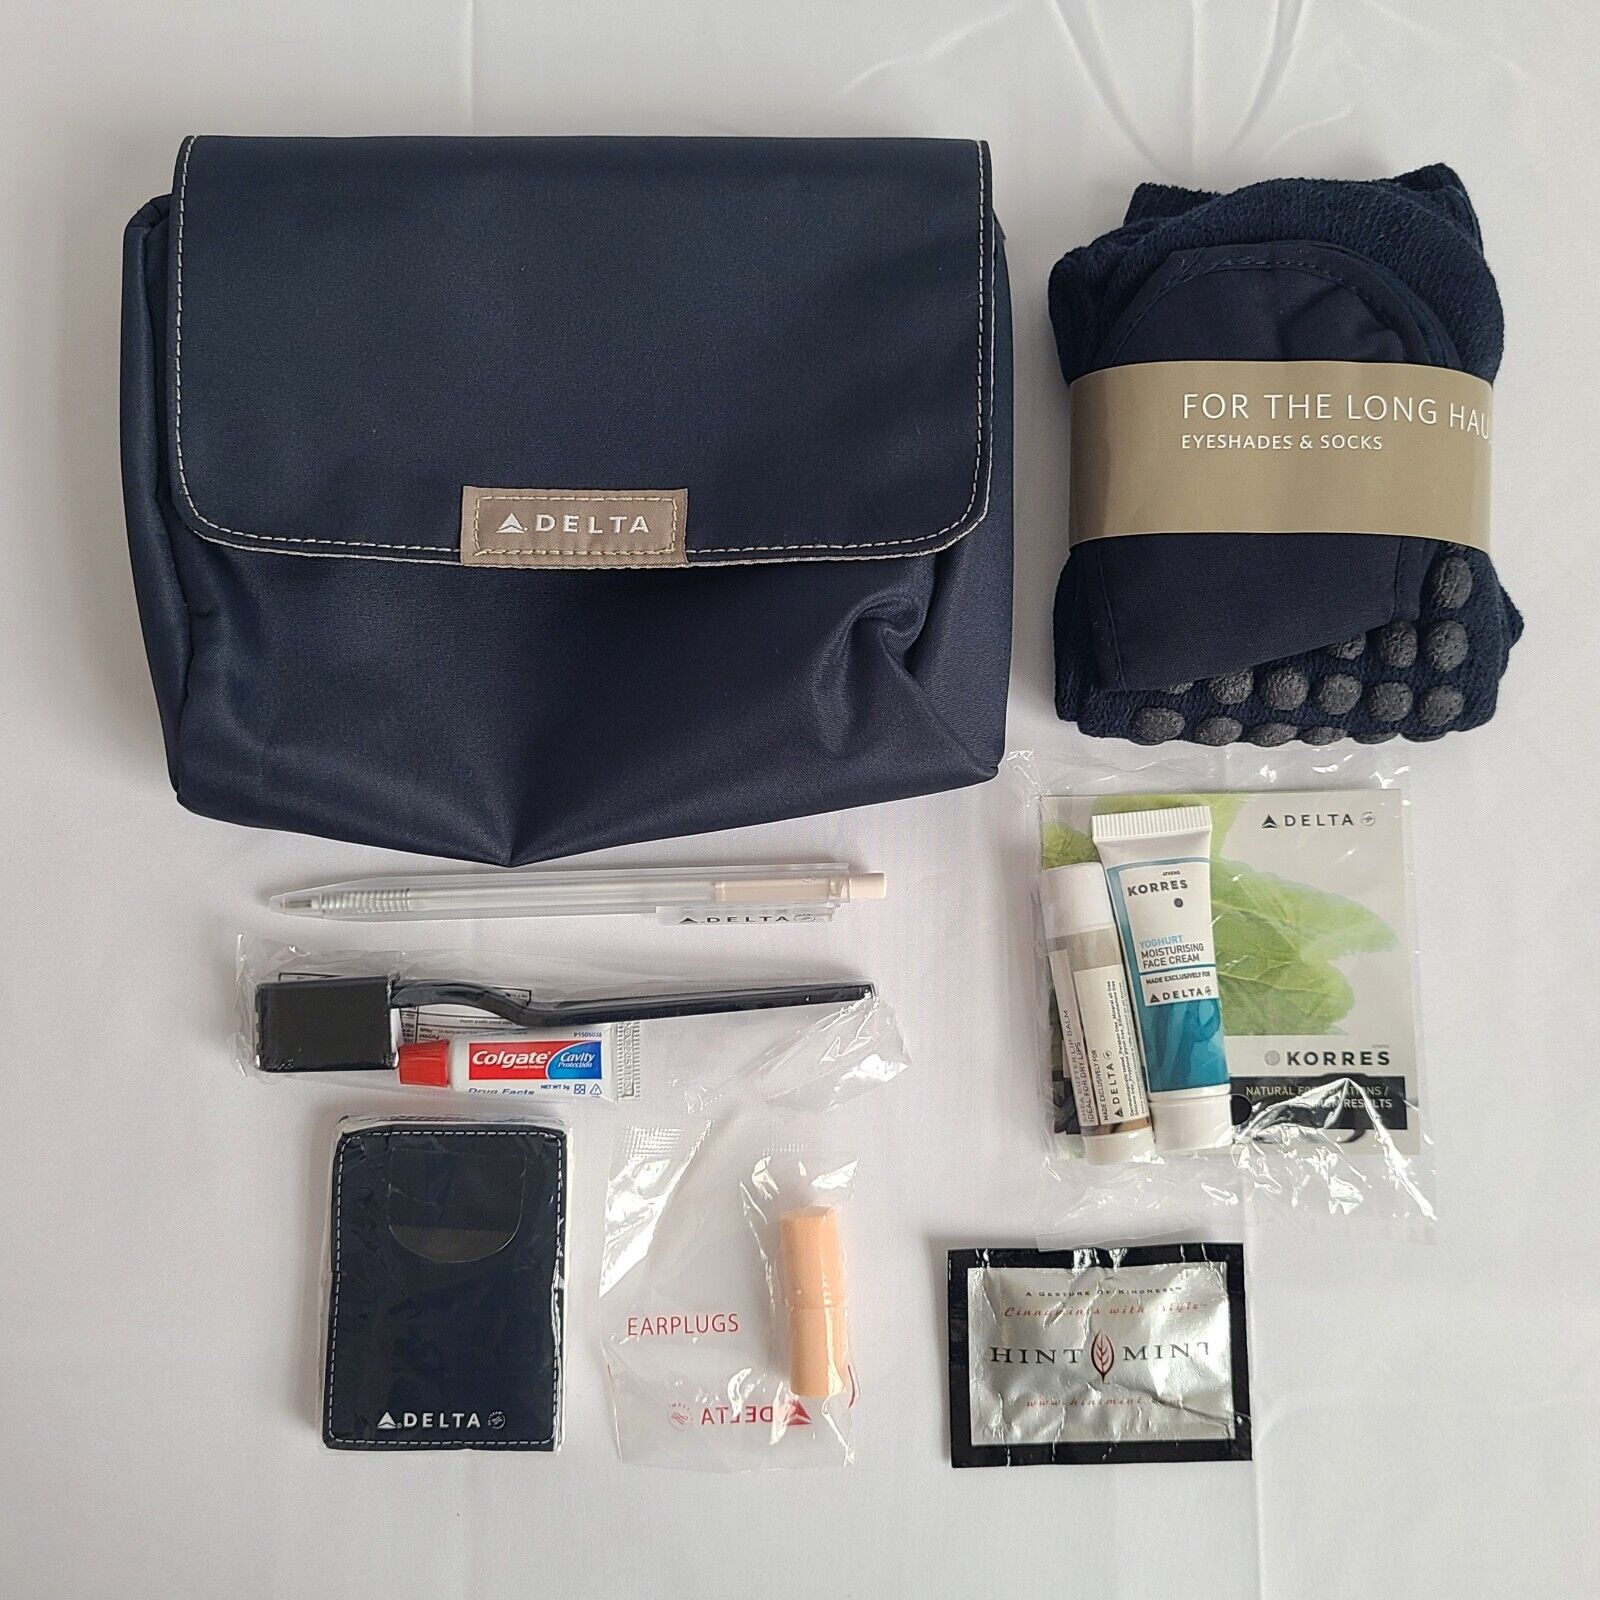 Vtg Delta Airlines Toiletry Amenity Kit Case Travel Makeup Bag First Class Blue